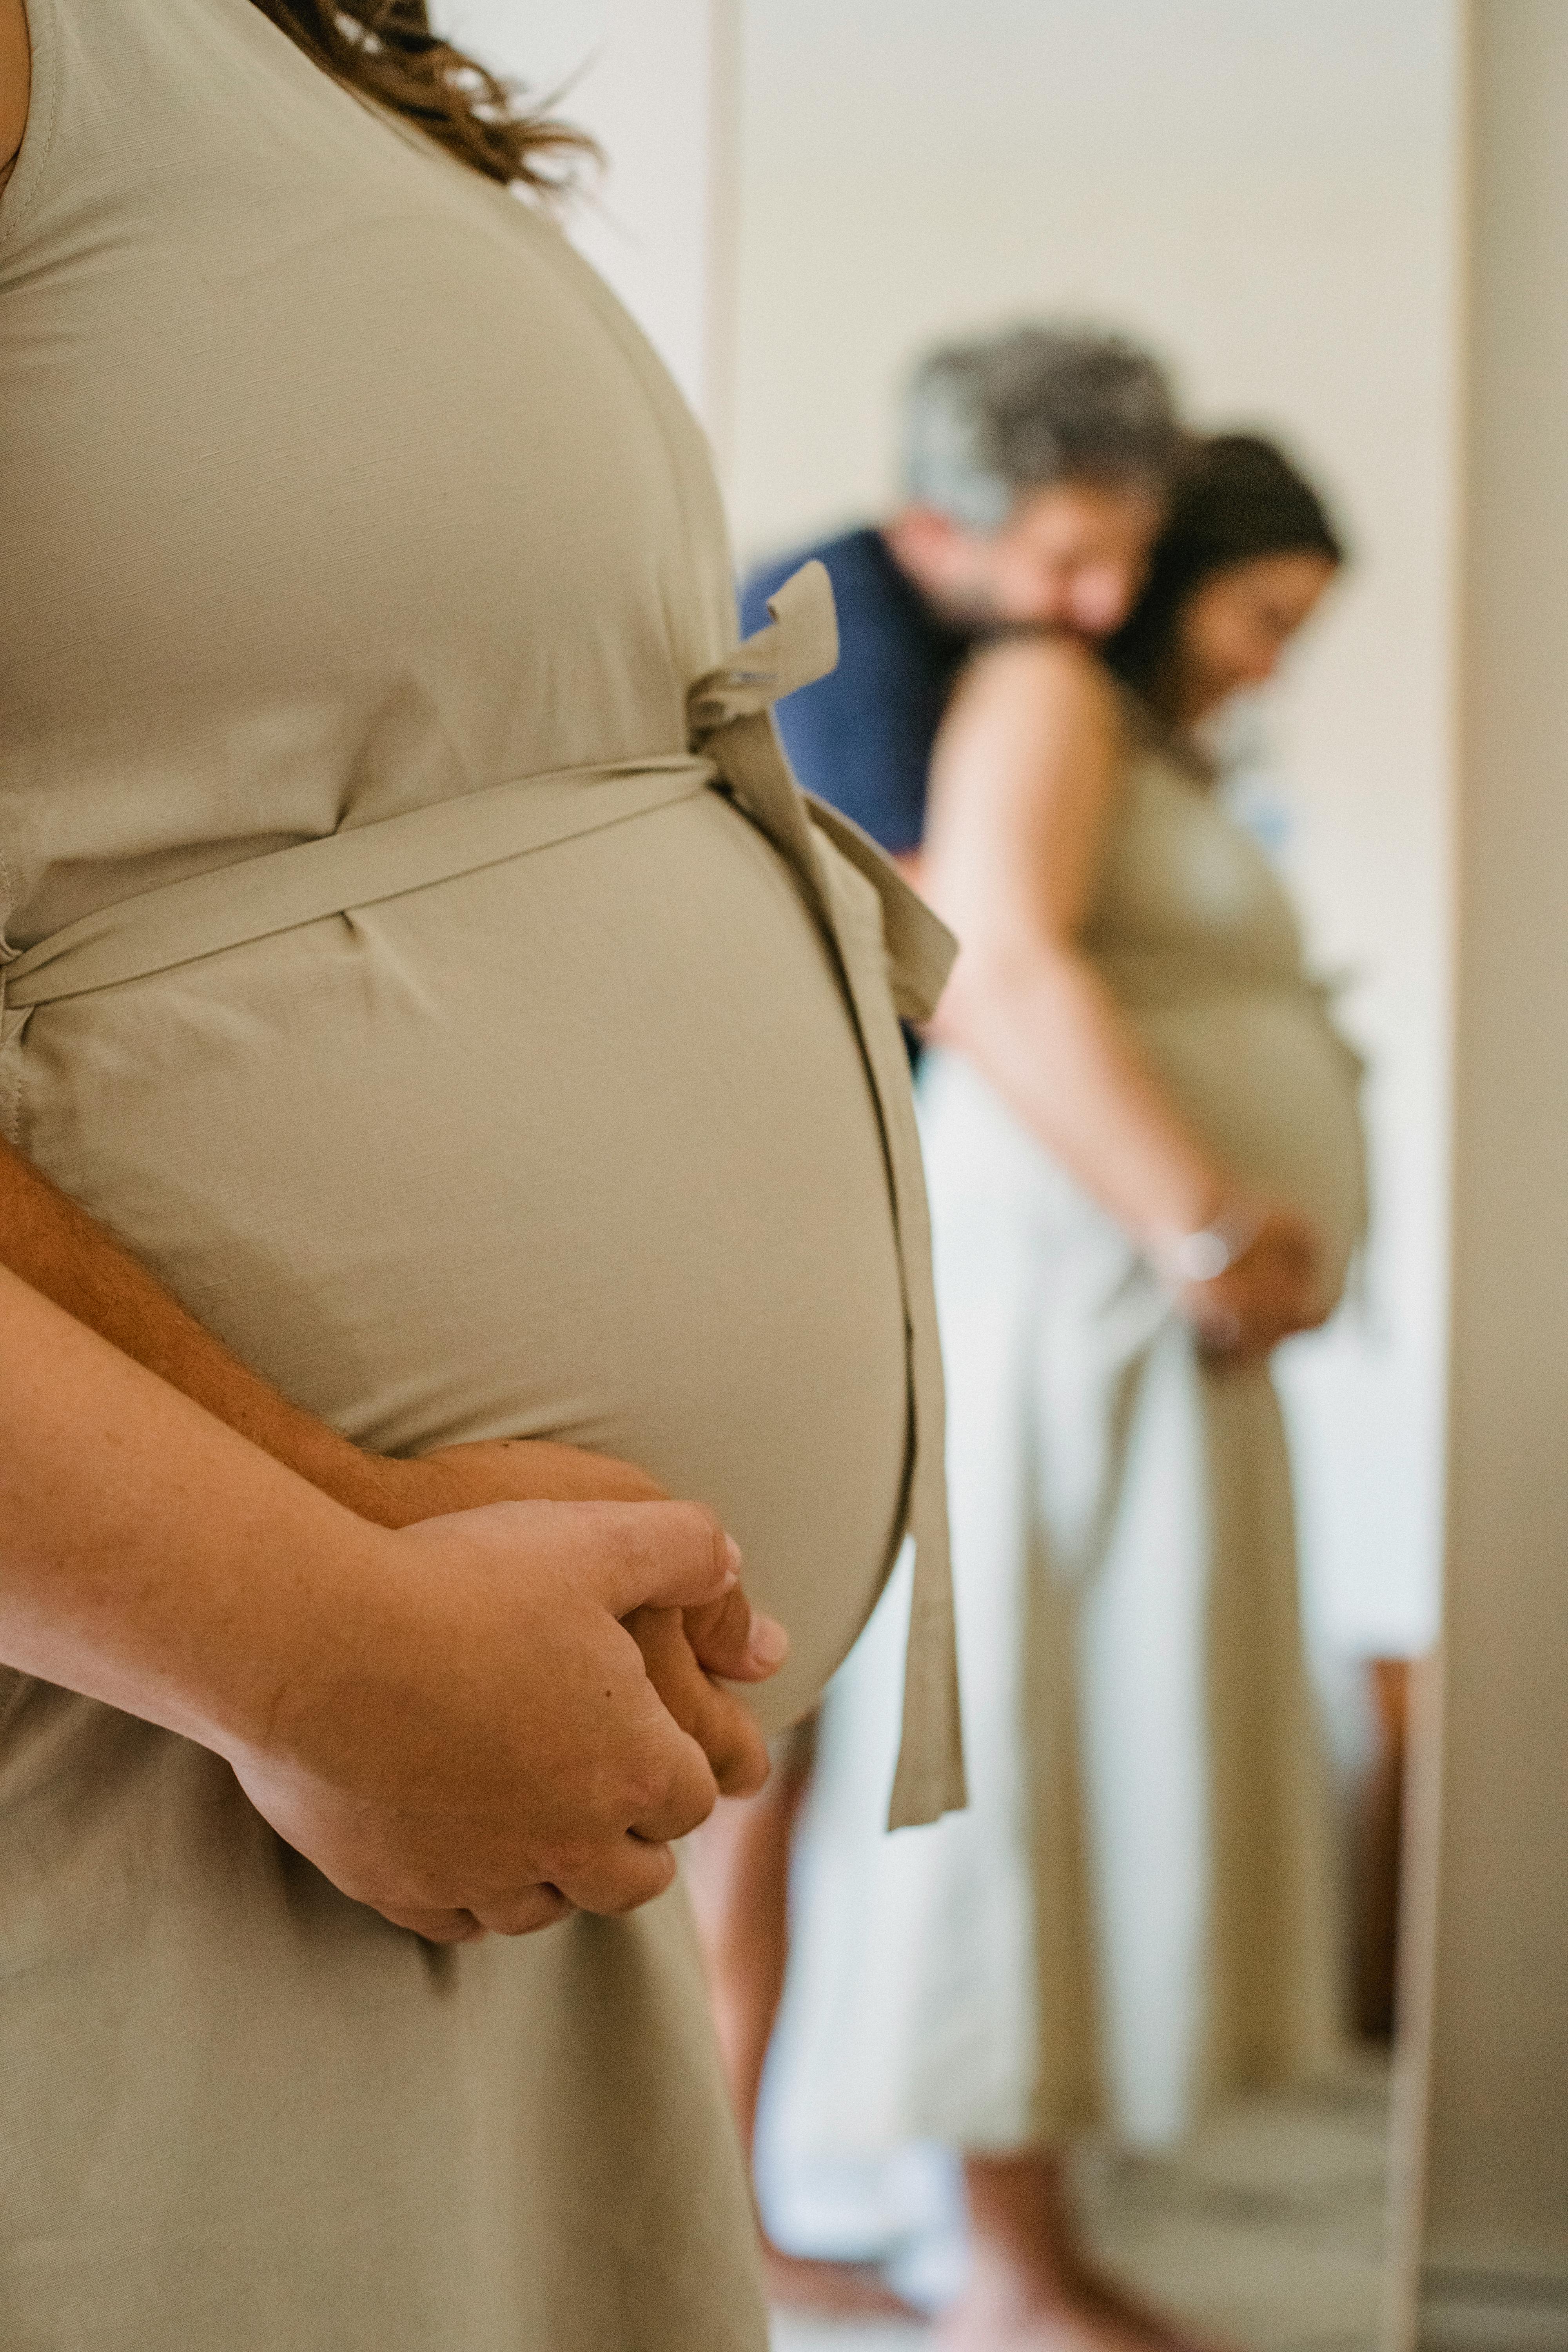 A pregnant couple embracing near a mirror | Source: Pexels